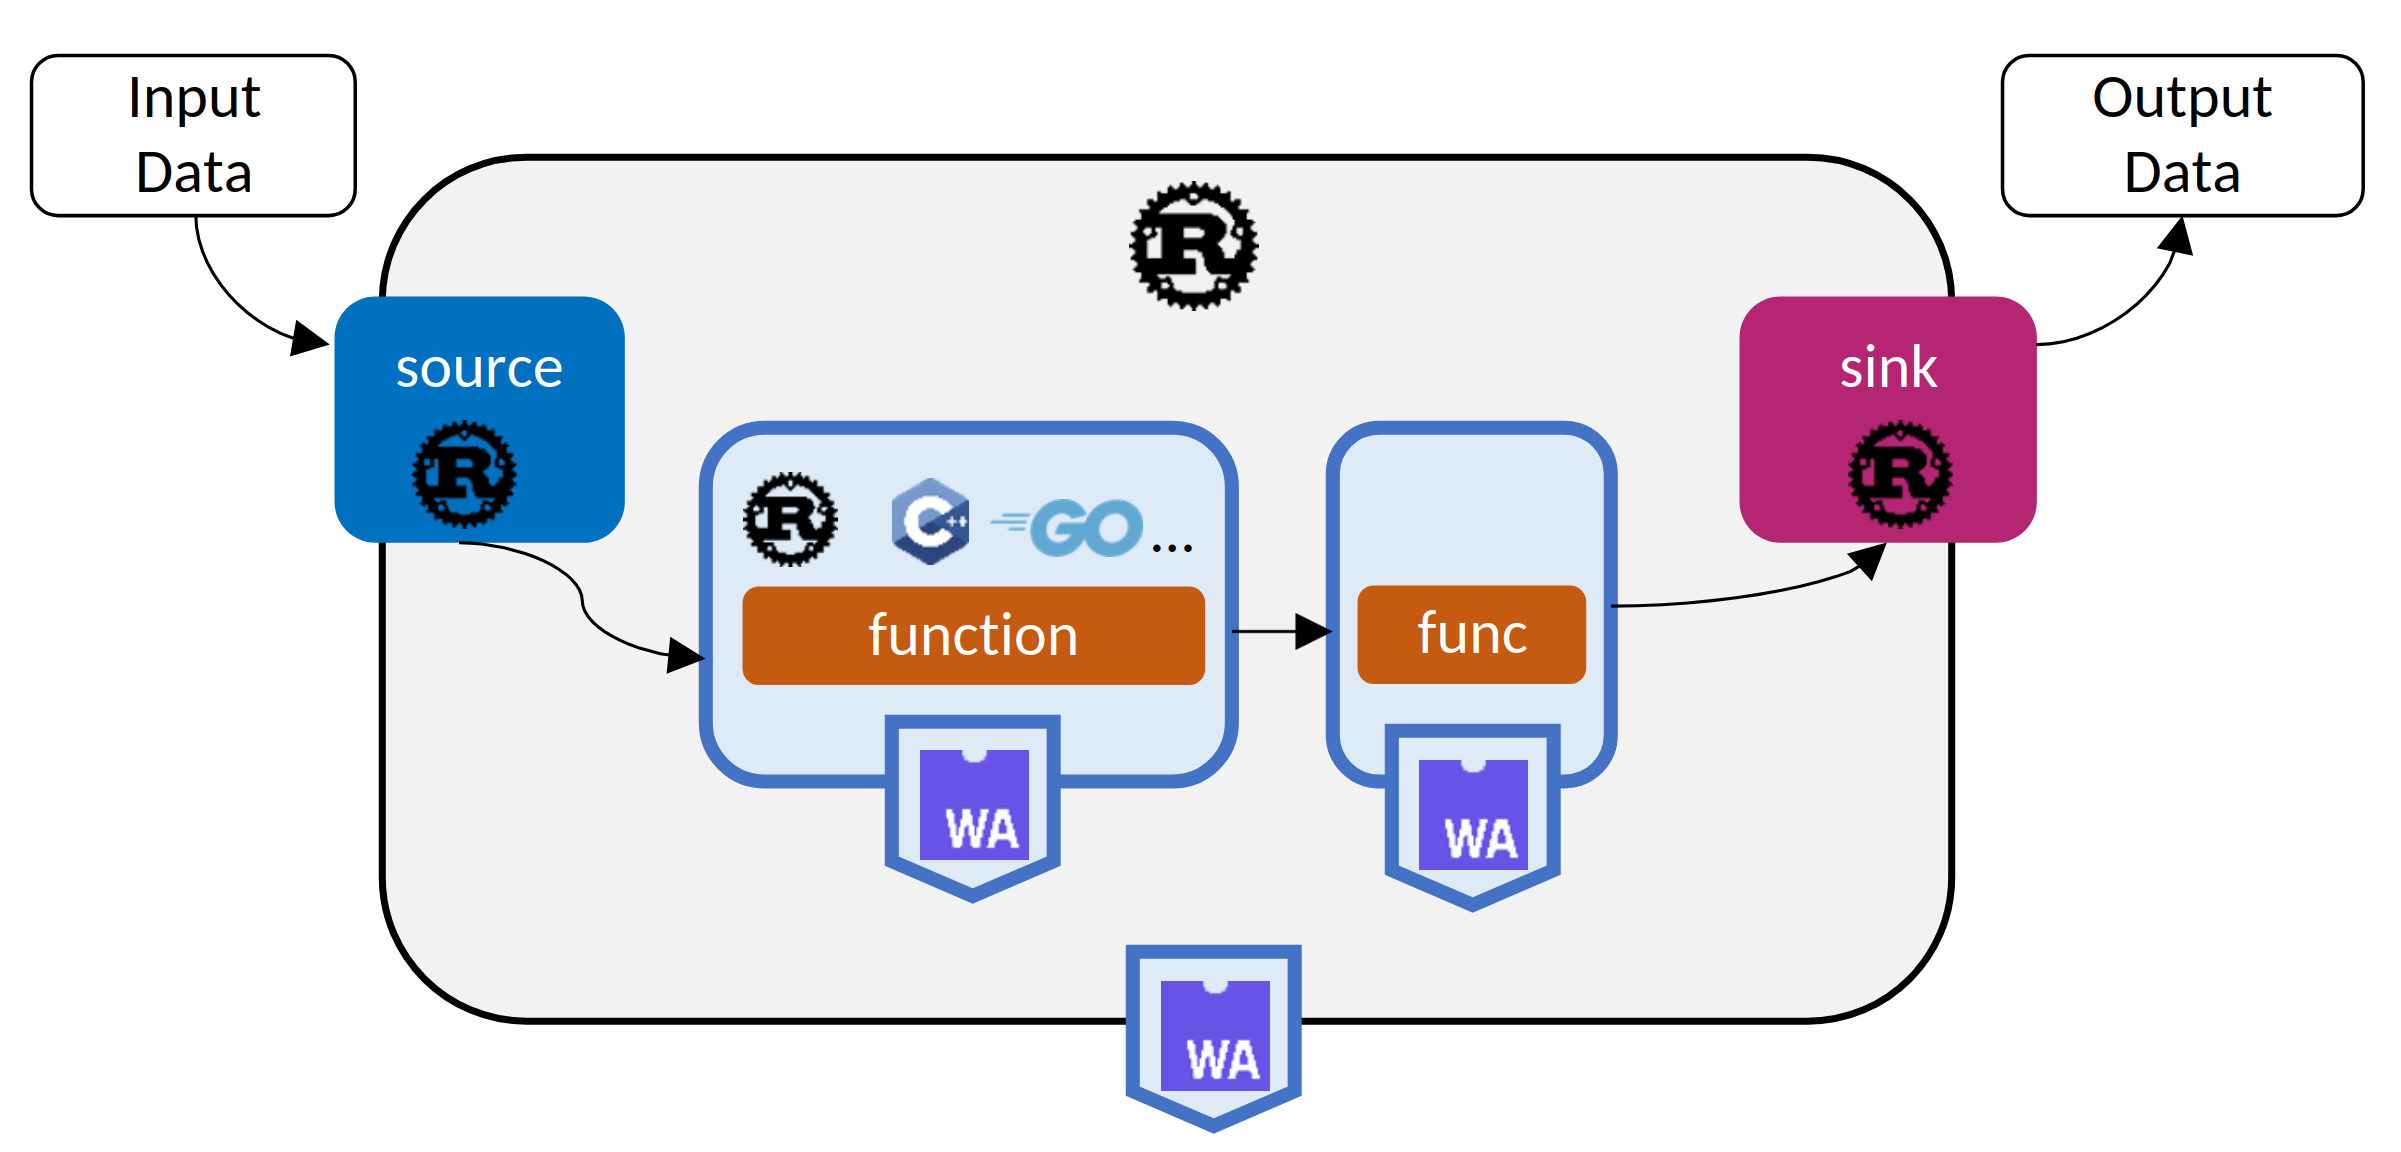 A data processing pipeline with REEF and WebAssembly functions.